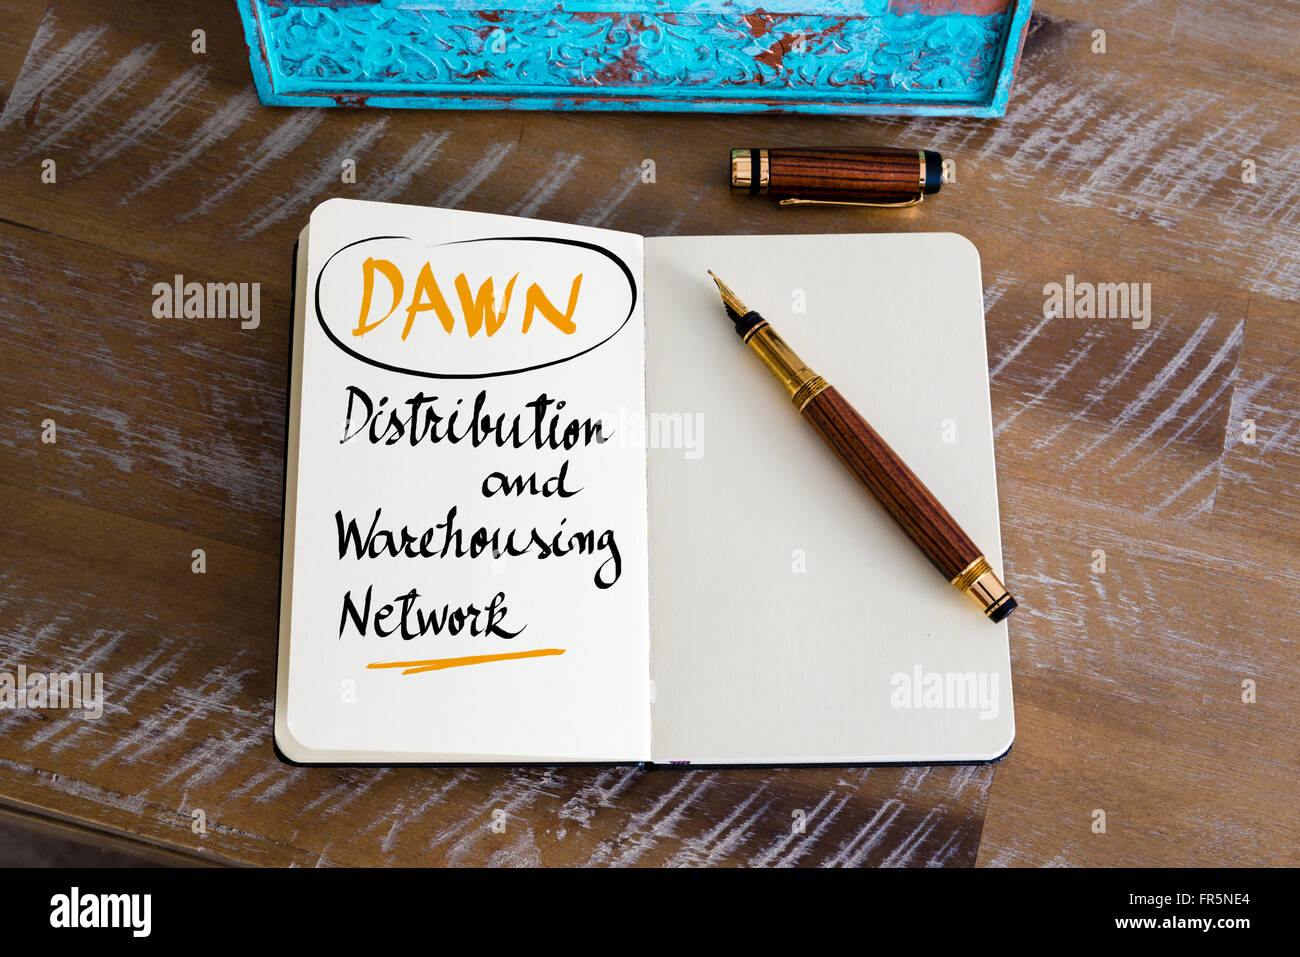 Retro effect and toned image of a fountain pen on a notebook. Business Acronym DAWN as Distribution and Warehousing Network as business concept image Stock Photo